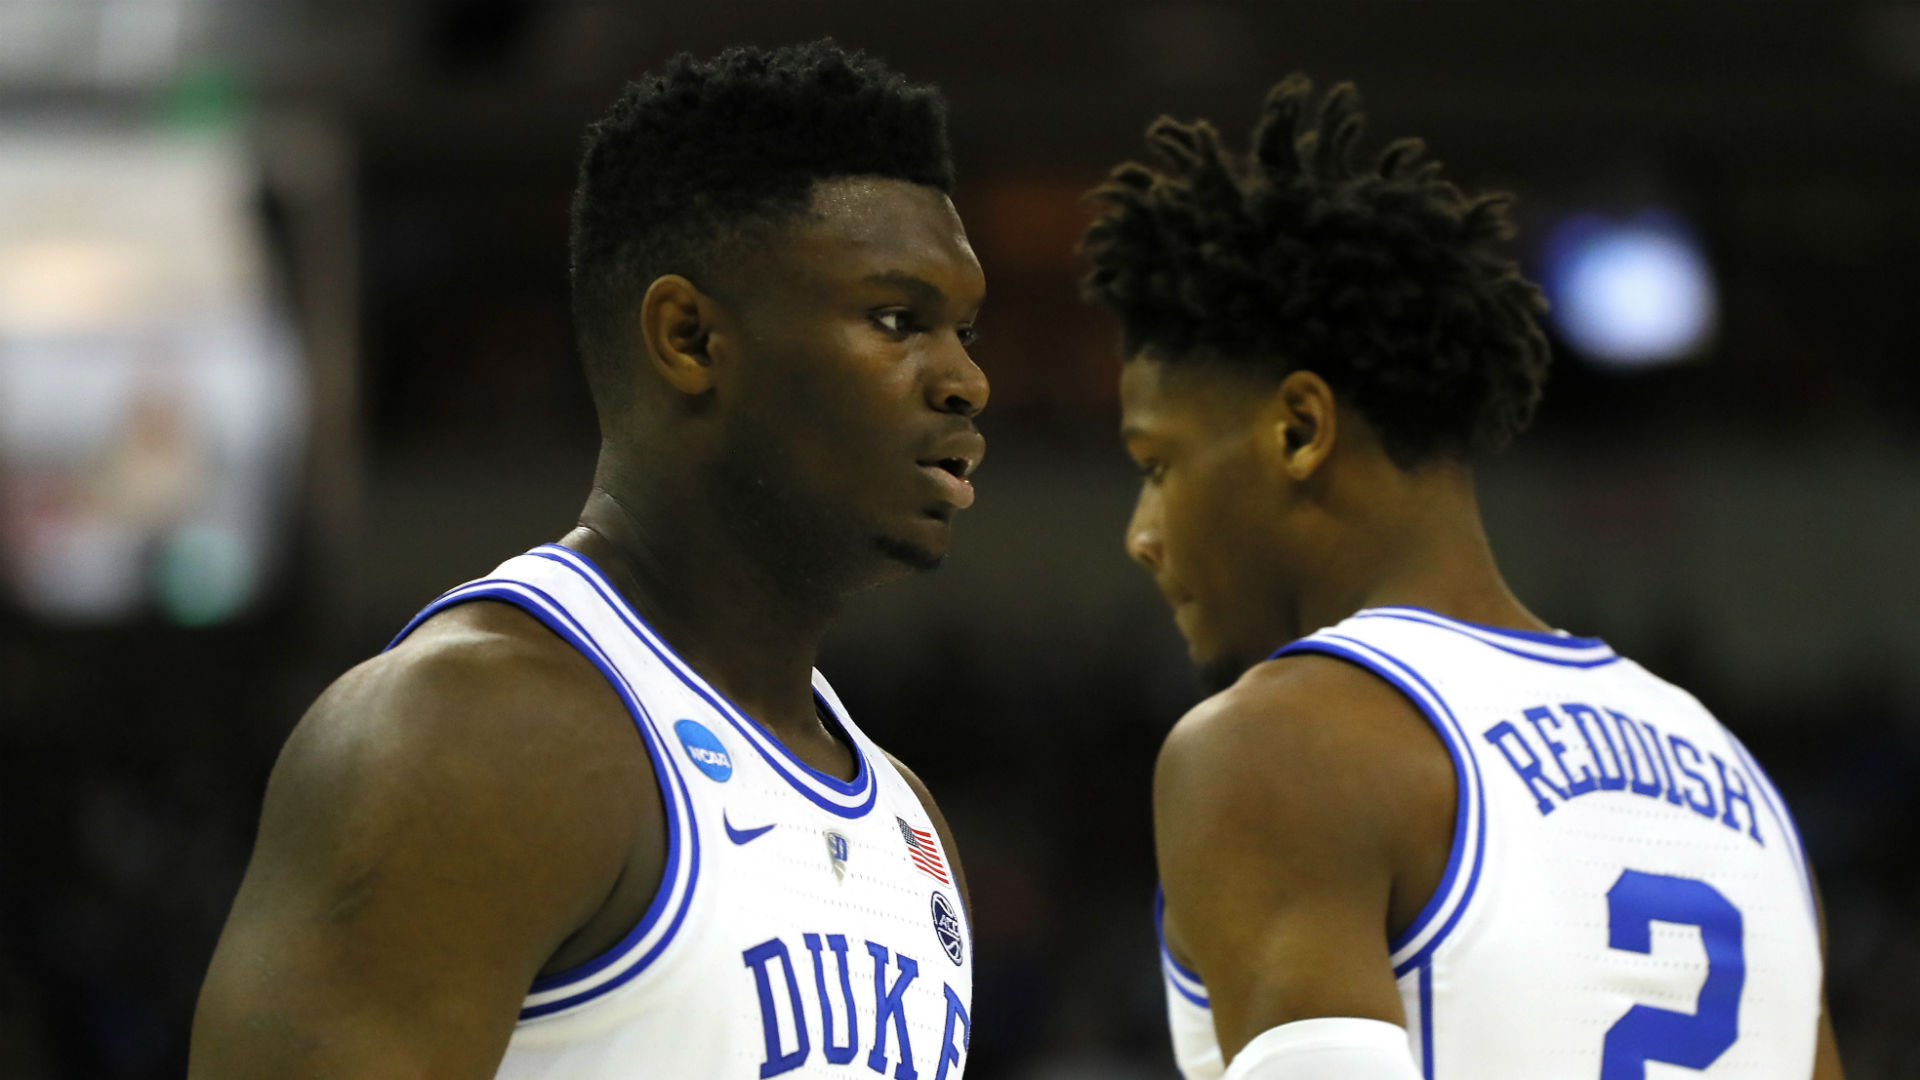 Cam Reddish will have a better NBA career than number one draft pick Zion Williamson, according to the duo's fellow 2019 rookies.